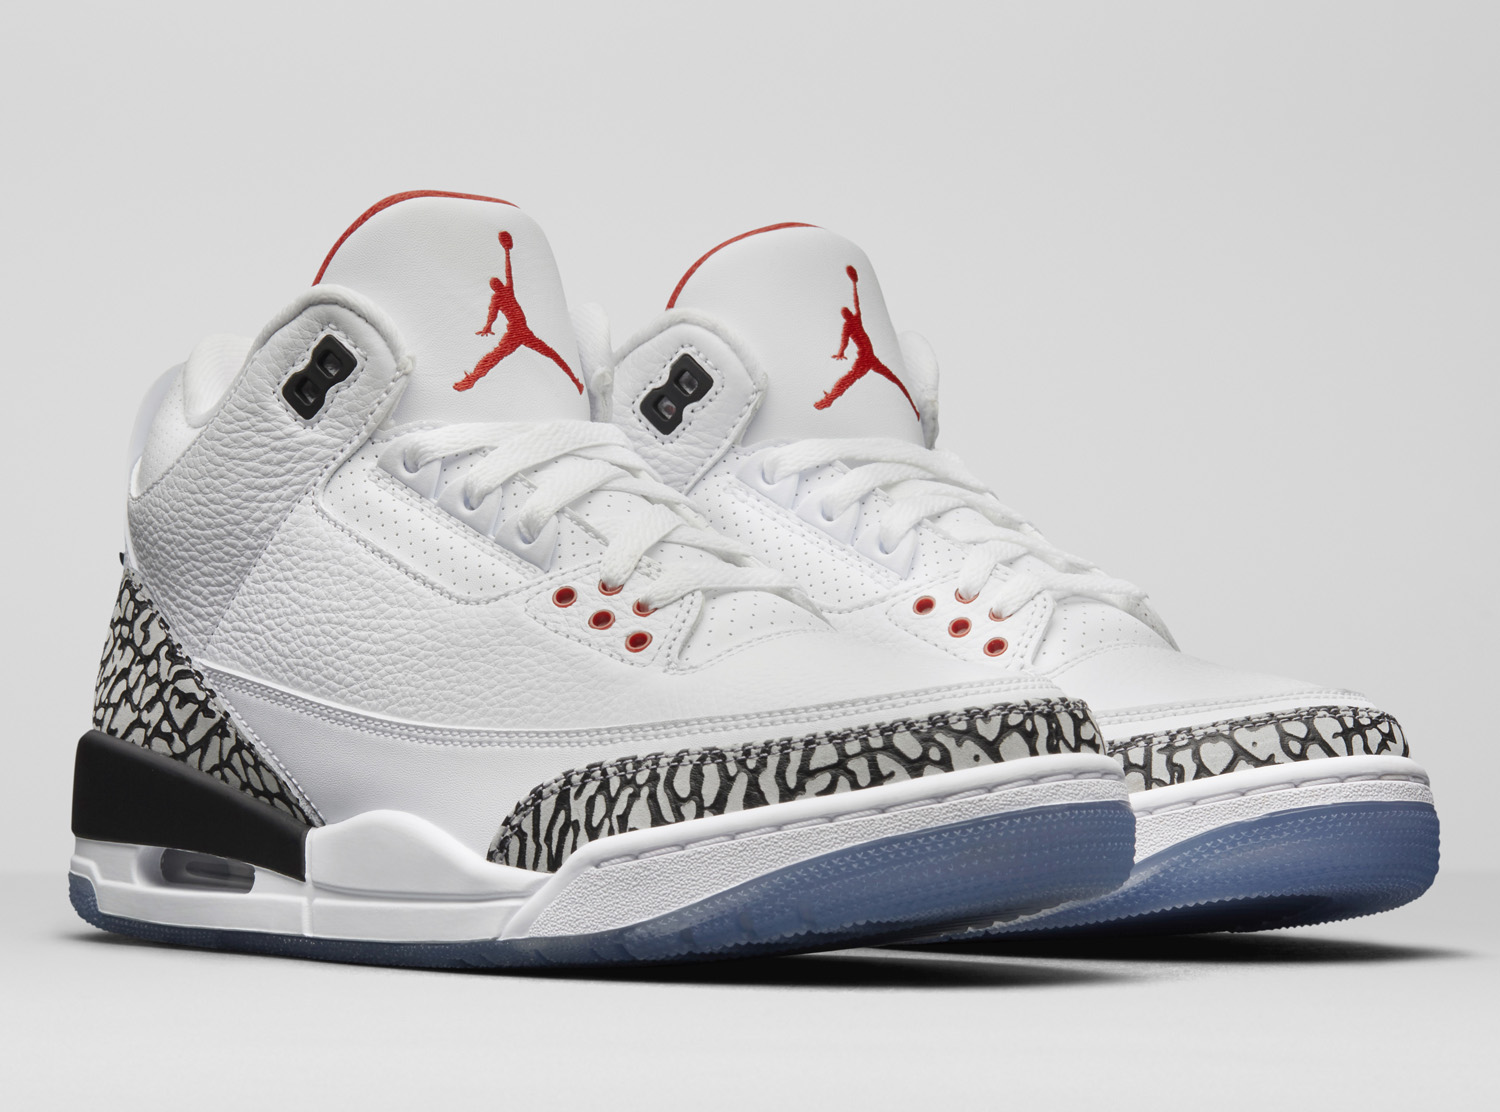 Australia in progress Huddle The Air Jordan 3 'White Cement' NRG Celebrates MJ's Jump From the Free  Throw Line - WearTesters